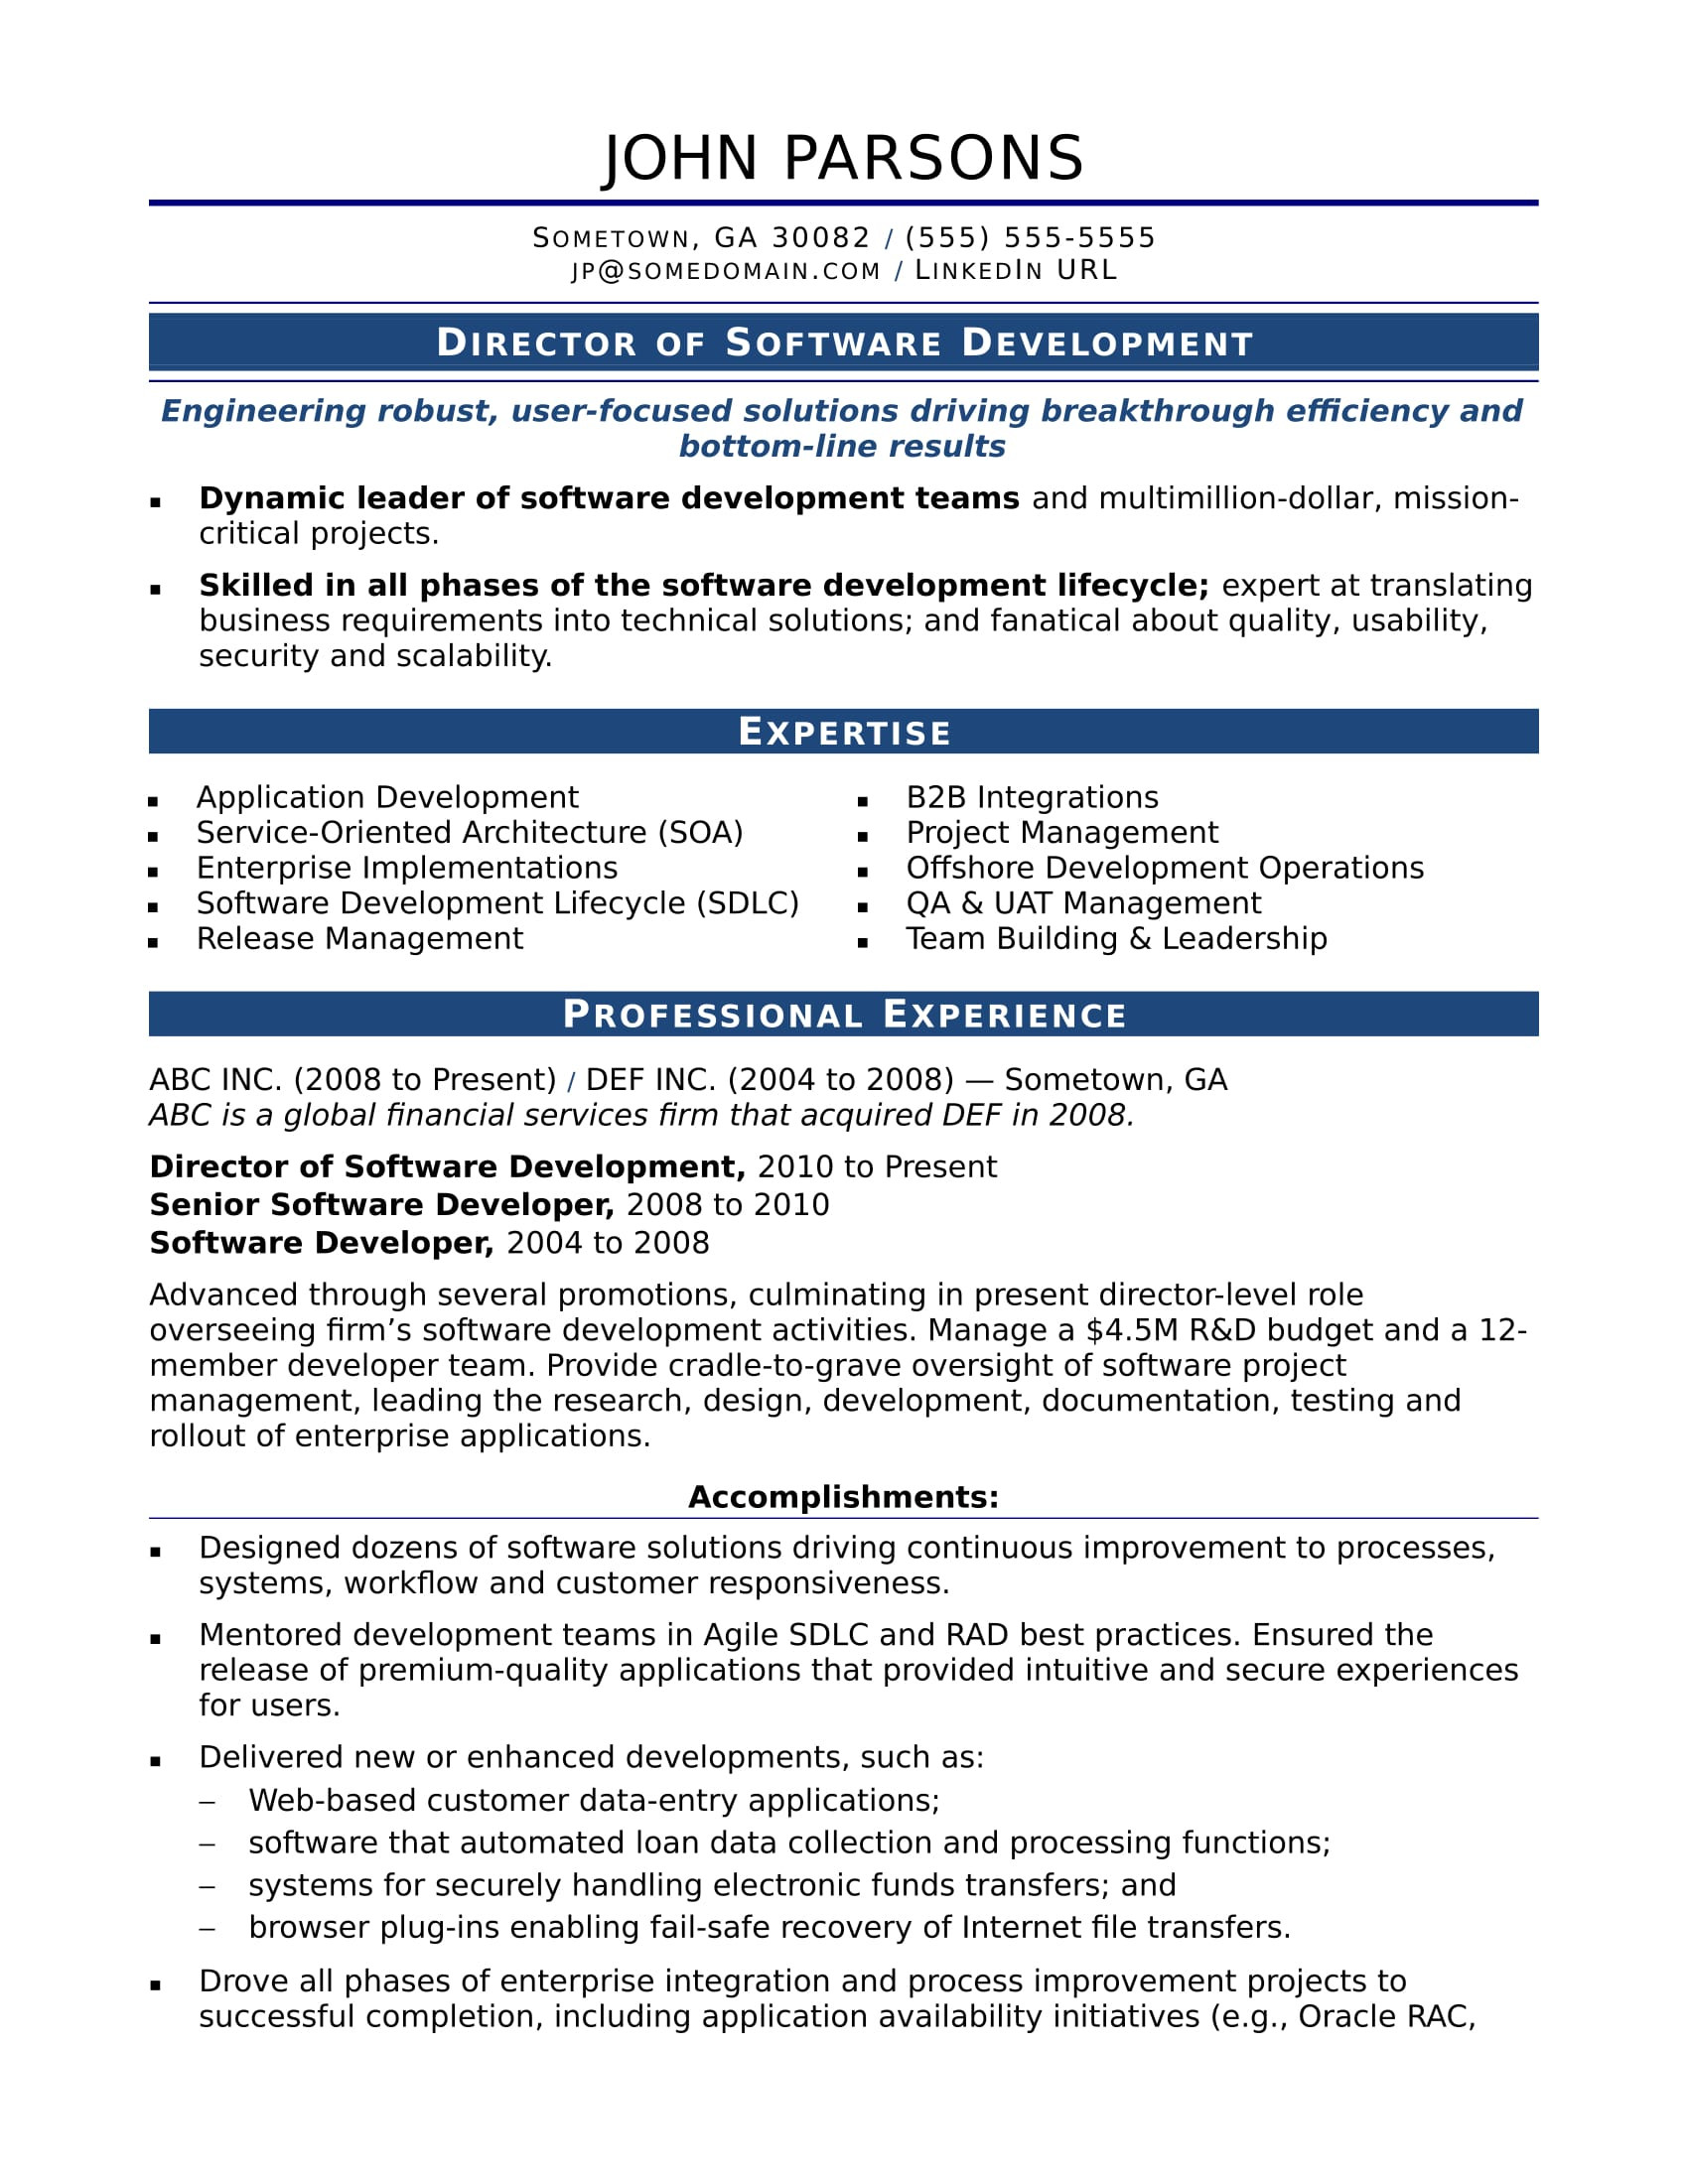 Sample Resume for Computer Engineer with Experience Sample Resume for An Experienced It Developer Monster.com